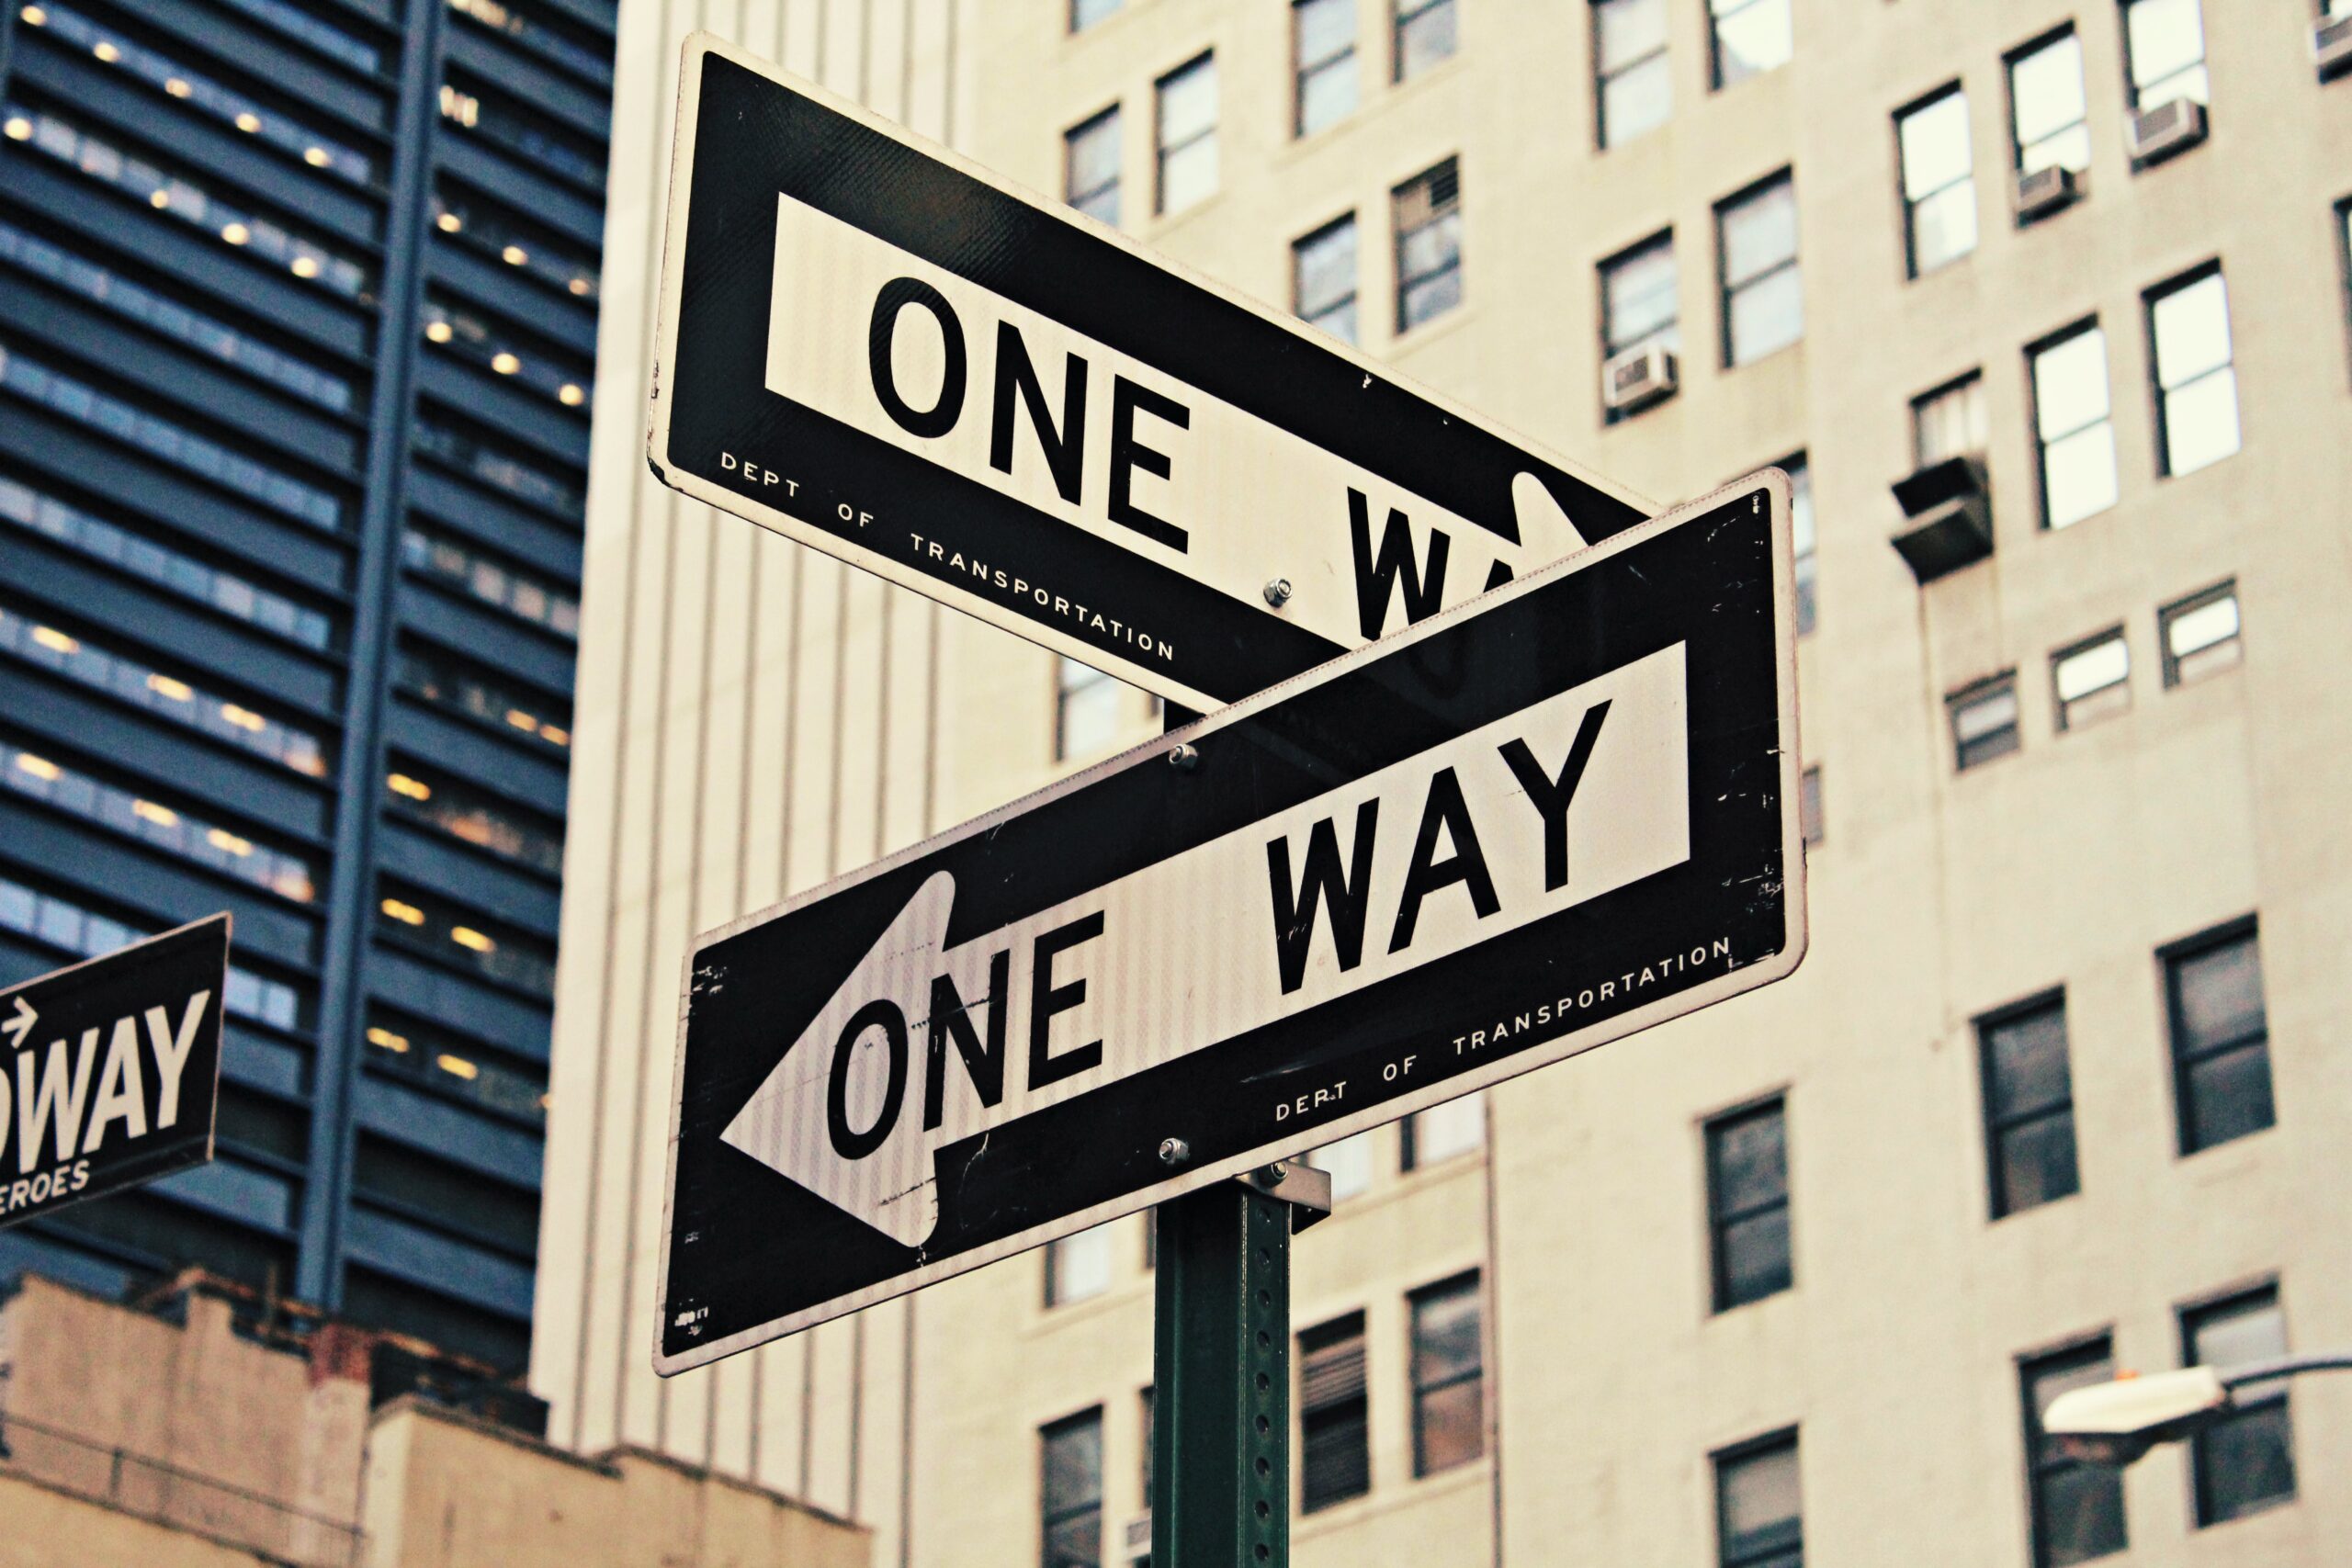 Two conflicting 'one way' signs meet in New York